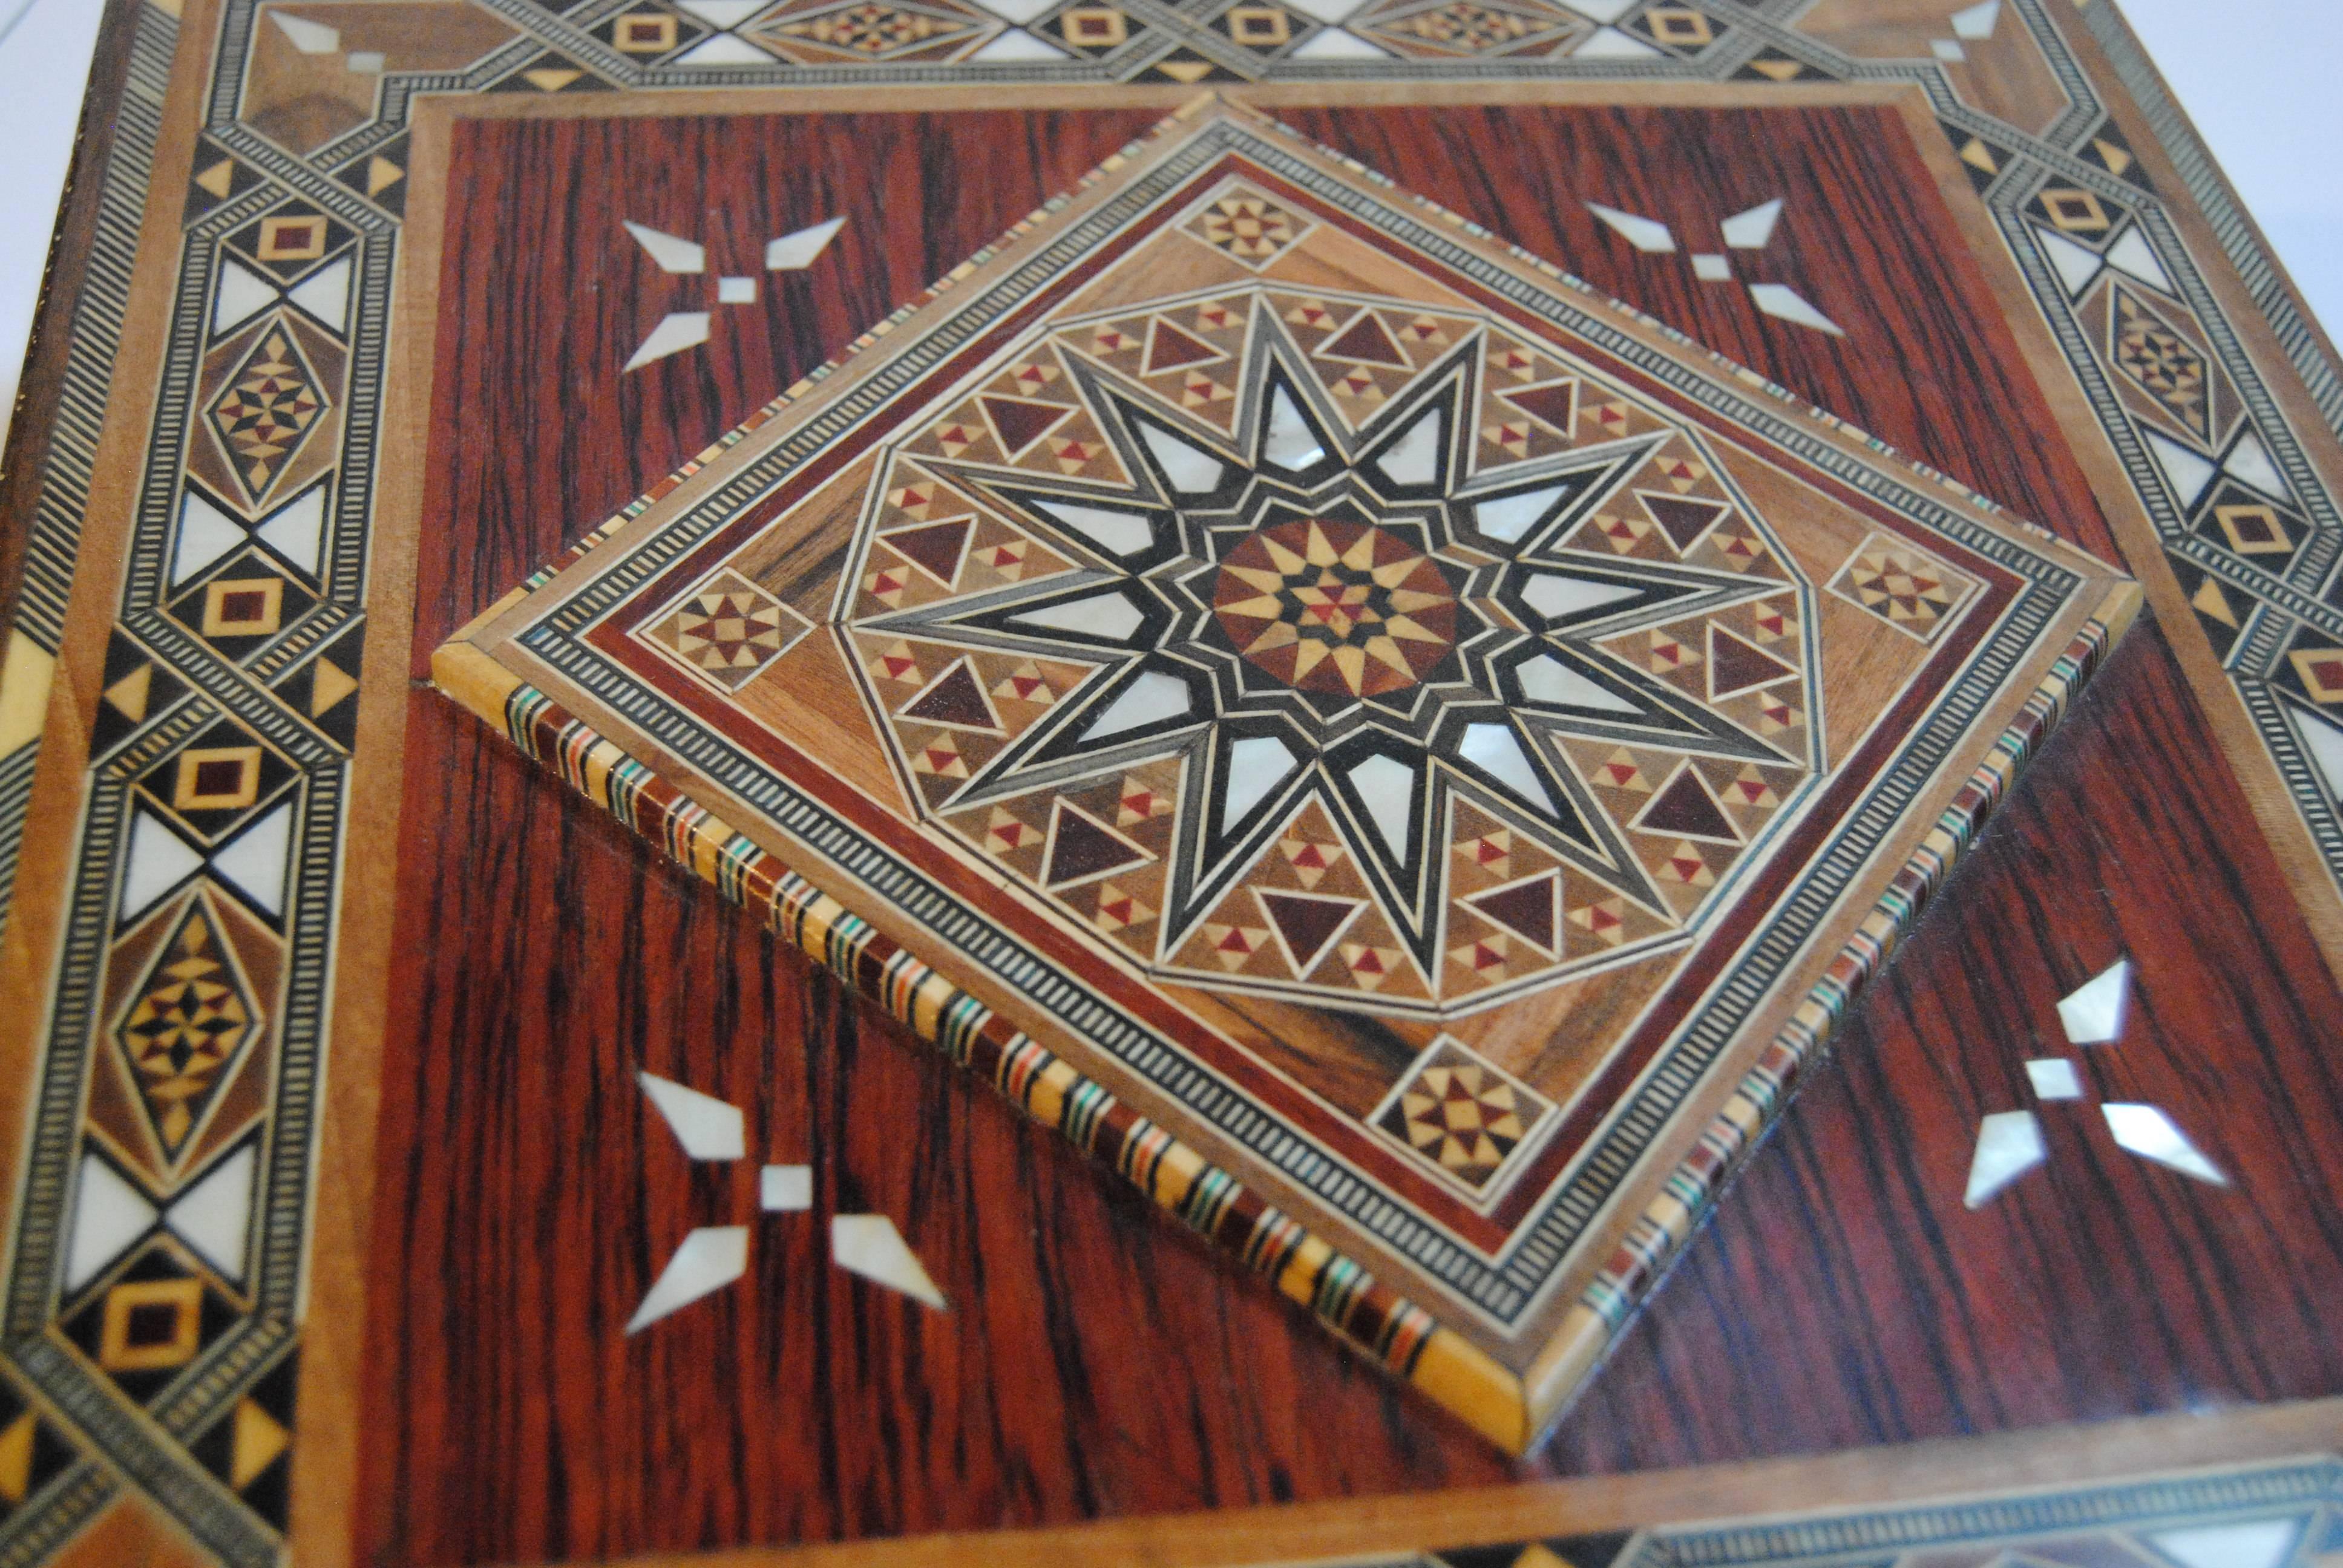 Syrian walnut wood box with fruitwoods and mother-of-pearl. The box has a raised center diamond design with very intricate inlay. It is lined in a cream leather. Handmade by skilled Syrian craftsmen from Damascus. In new condition, several